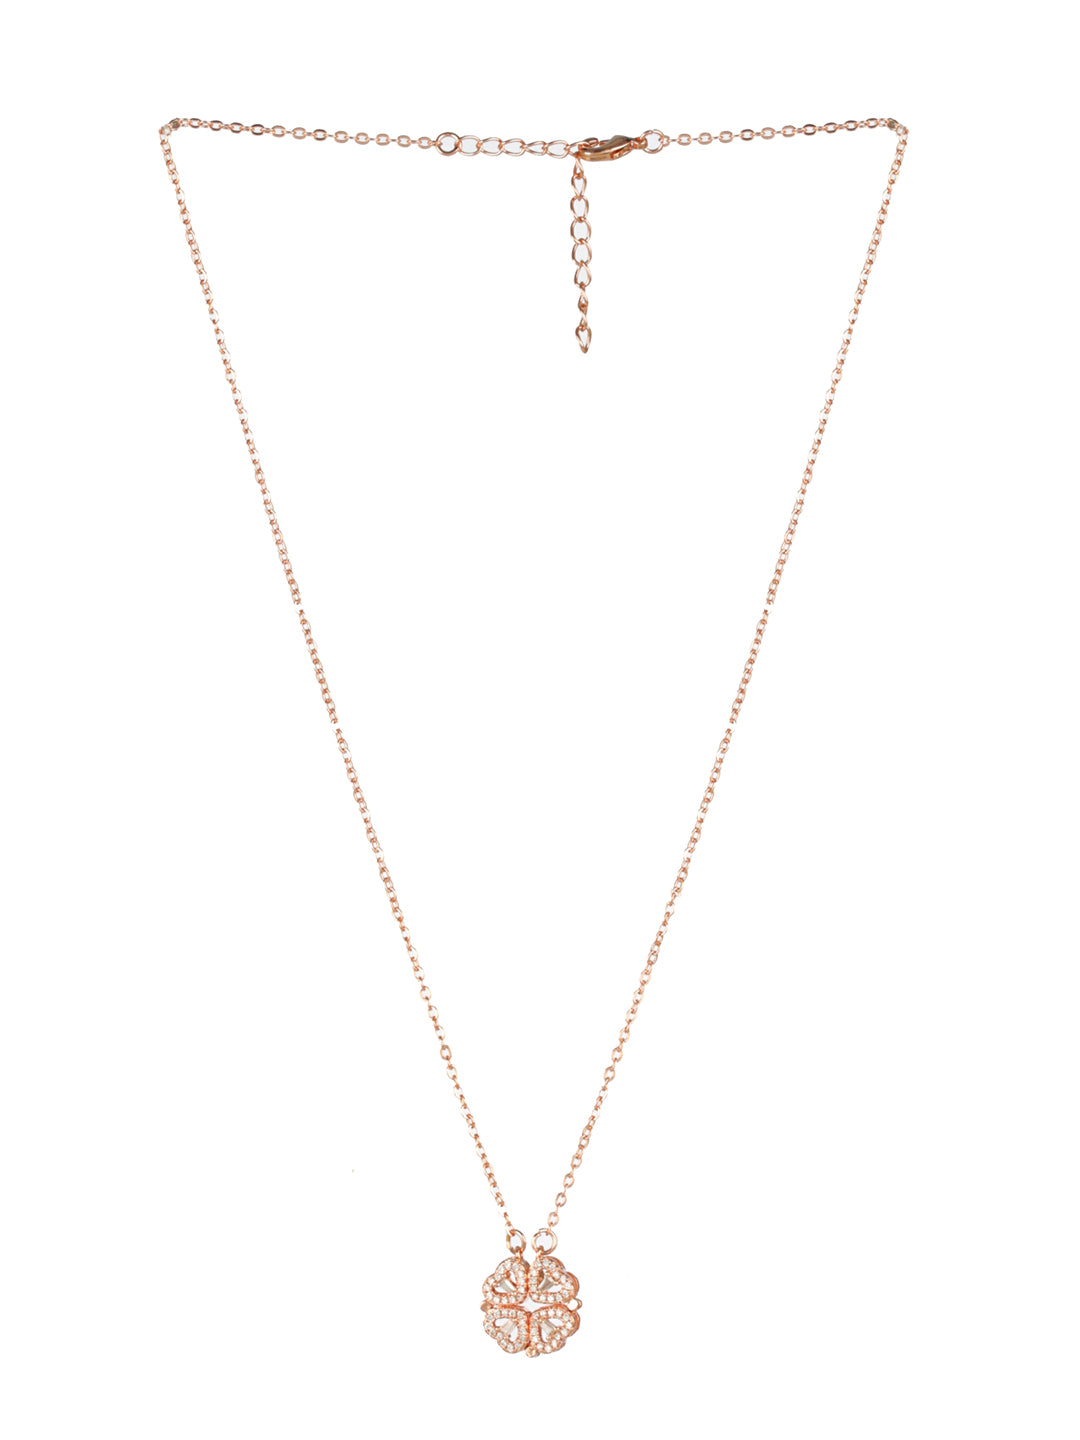 Priyaasi Hearts American Diamond Rose Gold-Plated Necklace